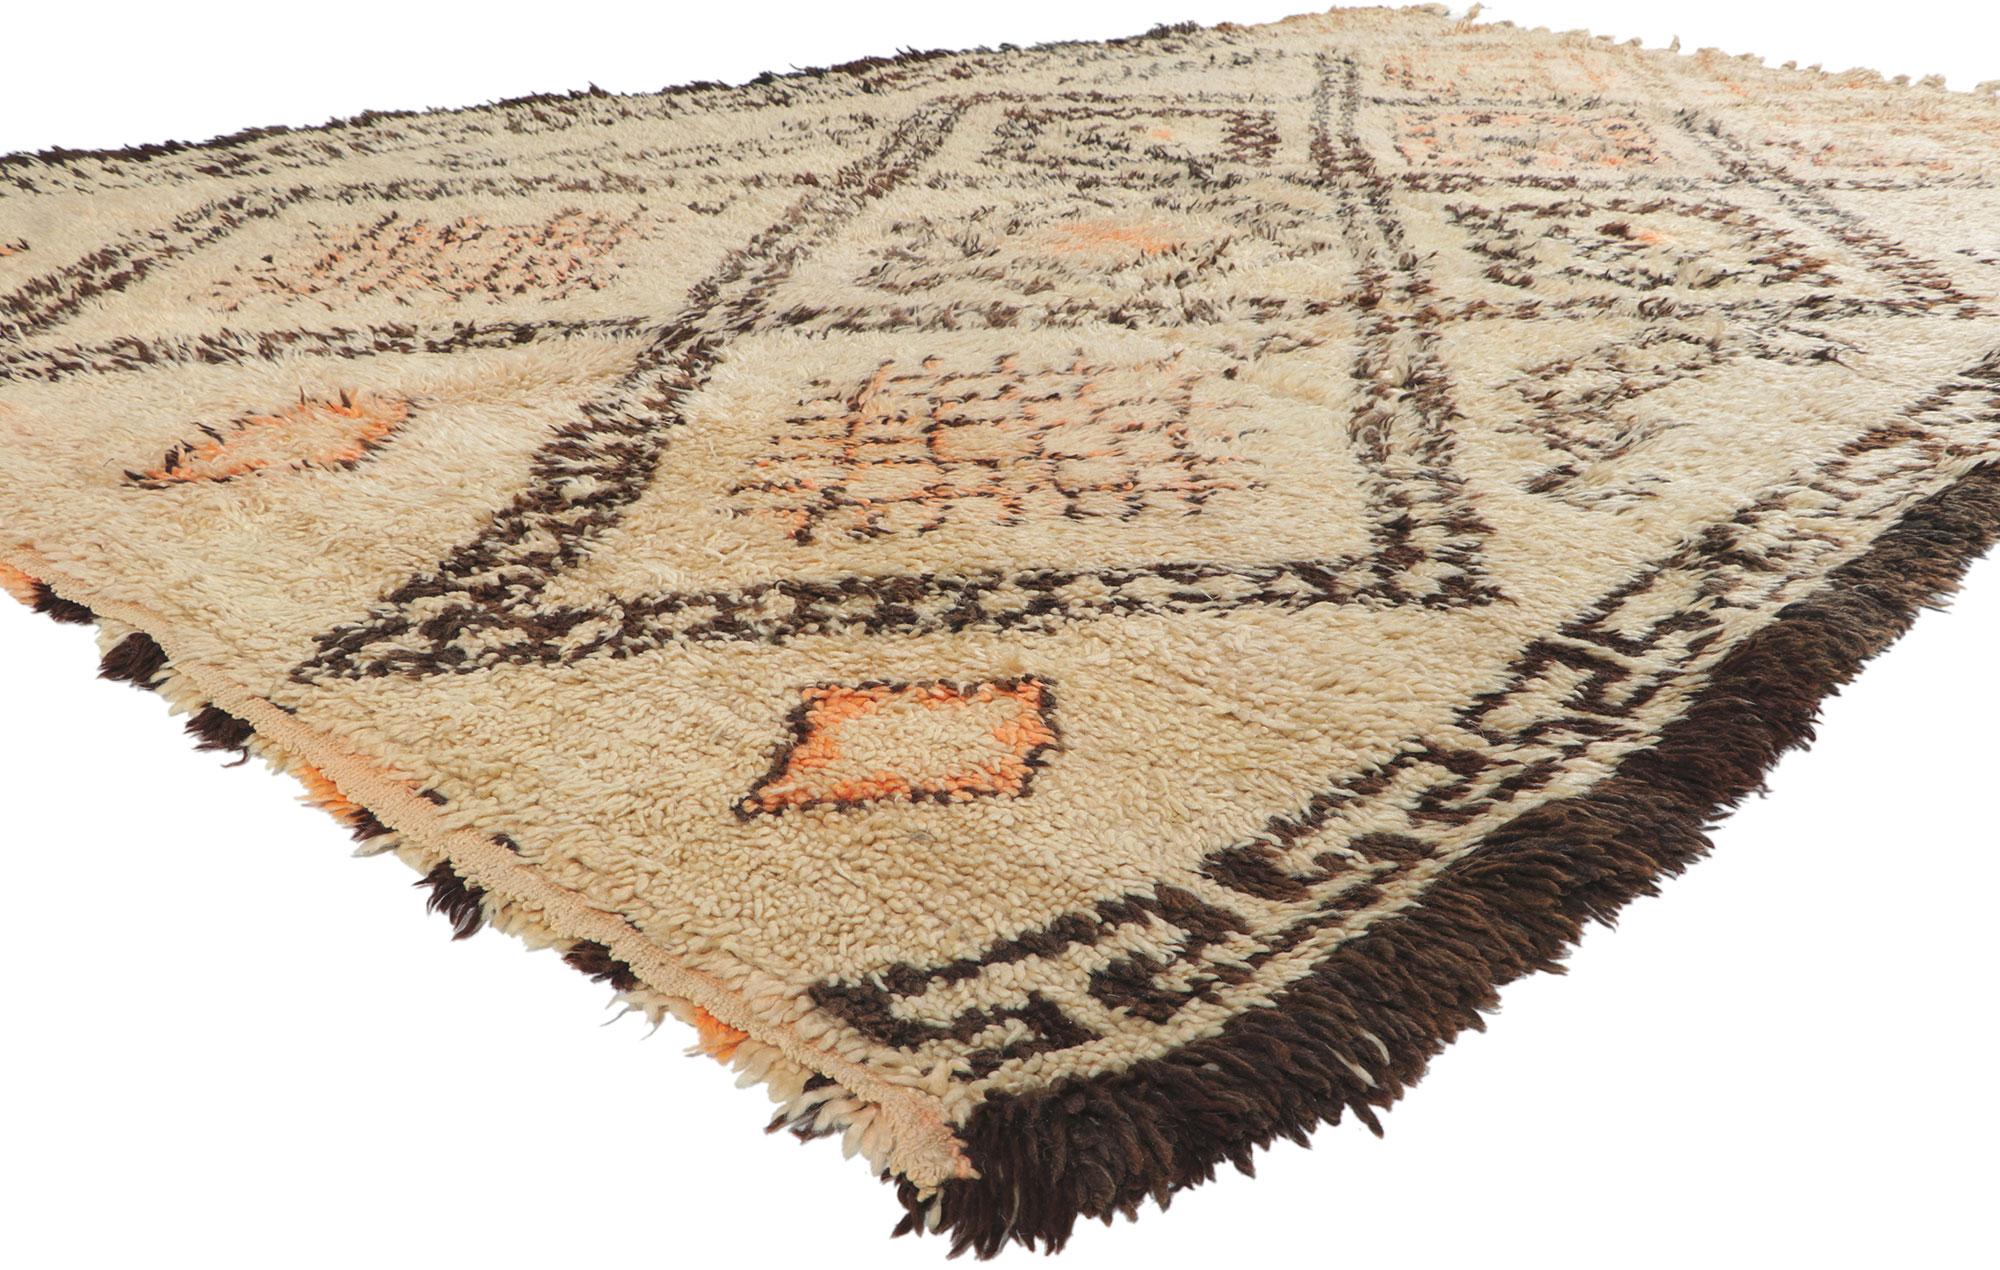 78365 vintage Moroccan Beni Ourain rug 07'04 x 13'00. With its nomadic charm, plush pile, incredible detail and texture, this hand knotted wool vintage Beni Ourain Moroccan rug is a captivating vision of woven beauty. The eye-catching diamond